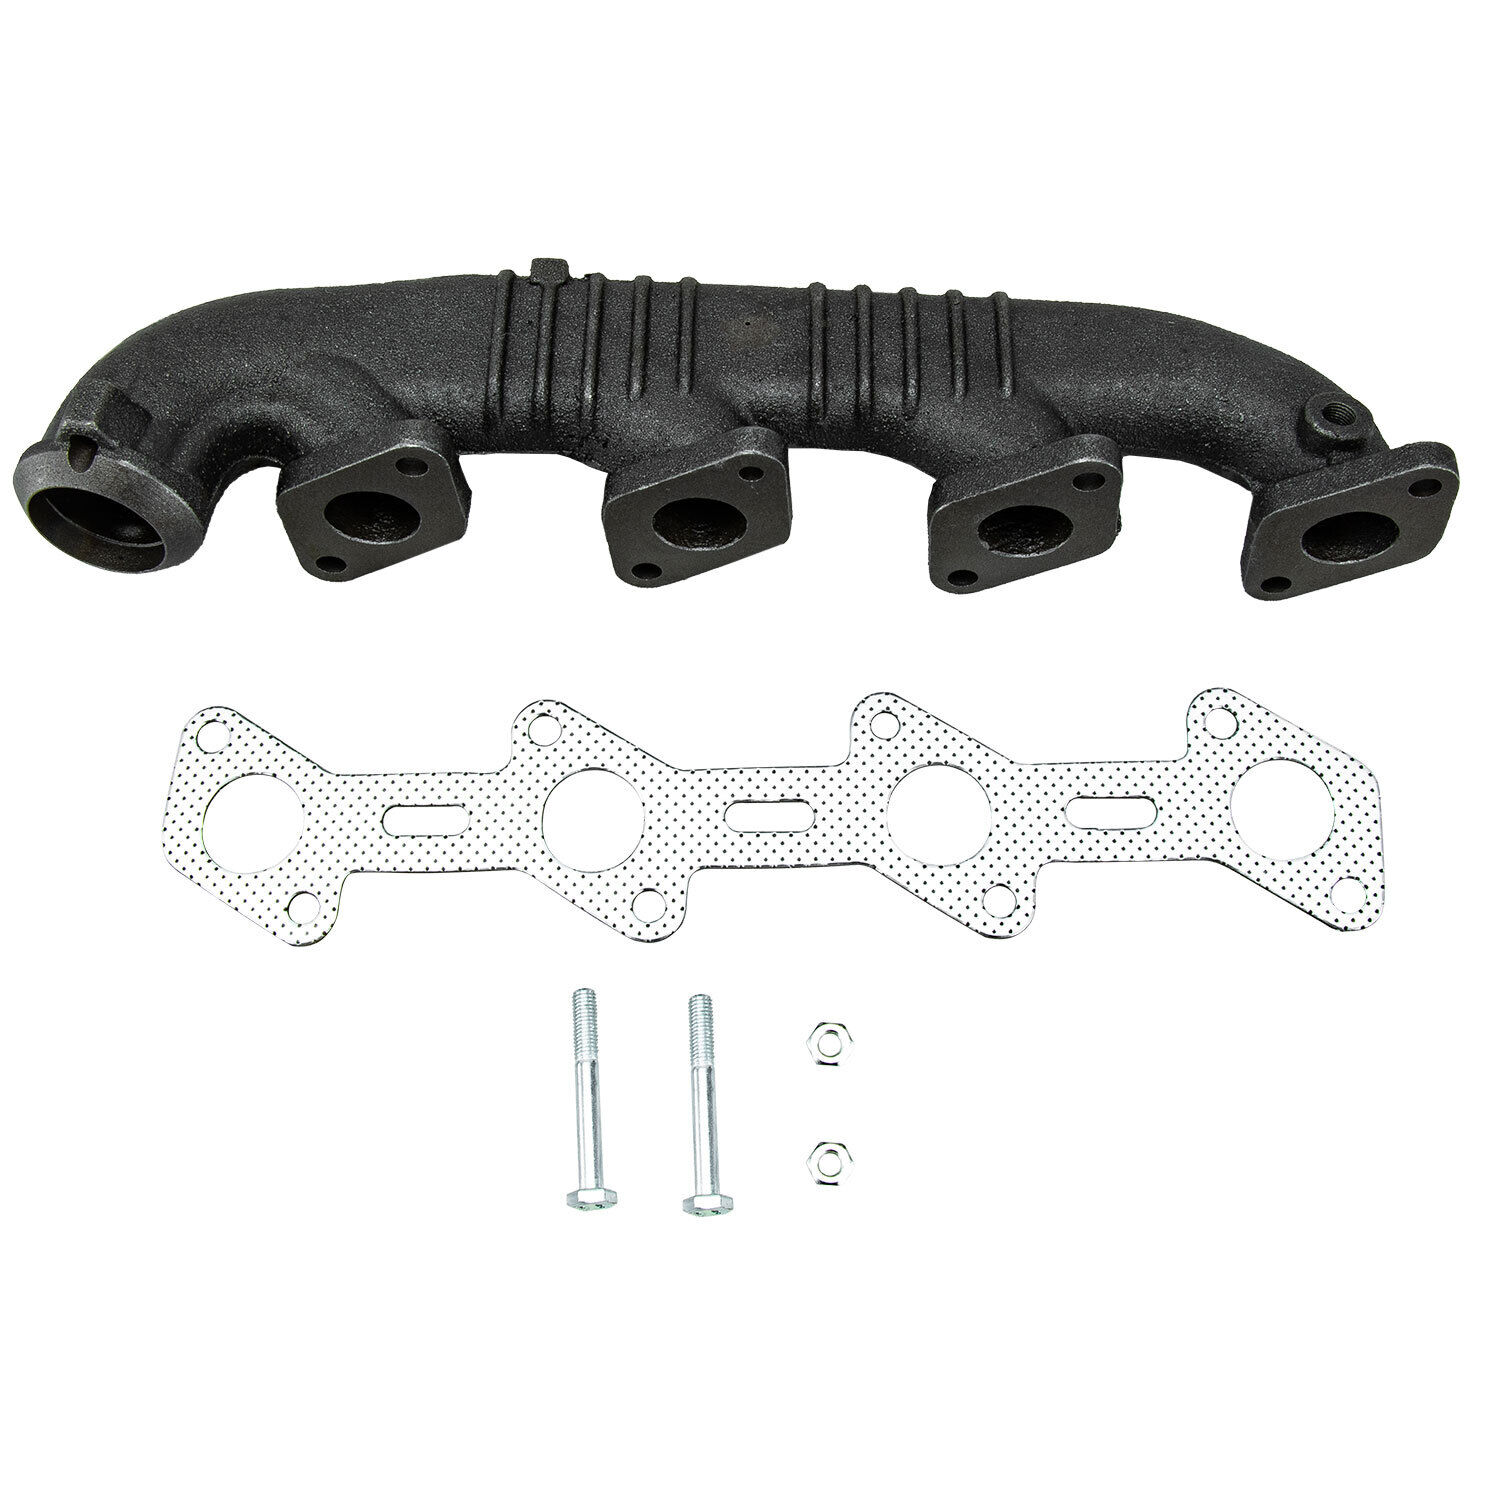 Left Exhaust Manifold for 03-07 Ford F250 F350 E350 Super Duty 6.0L V8 DIESEL